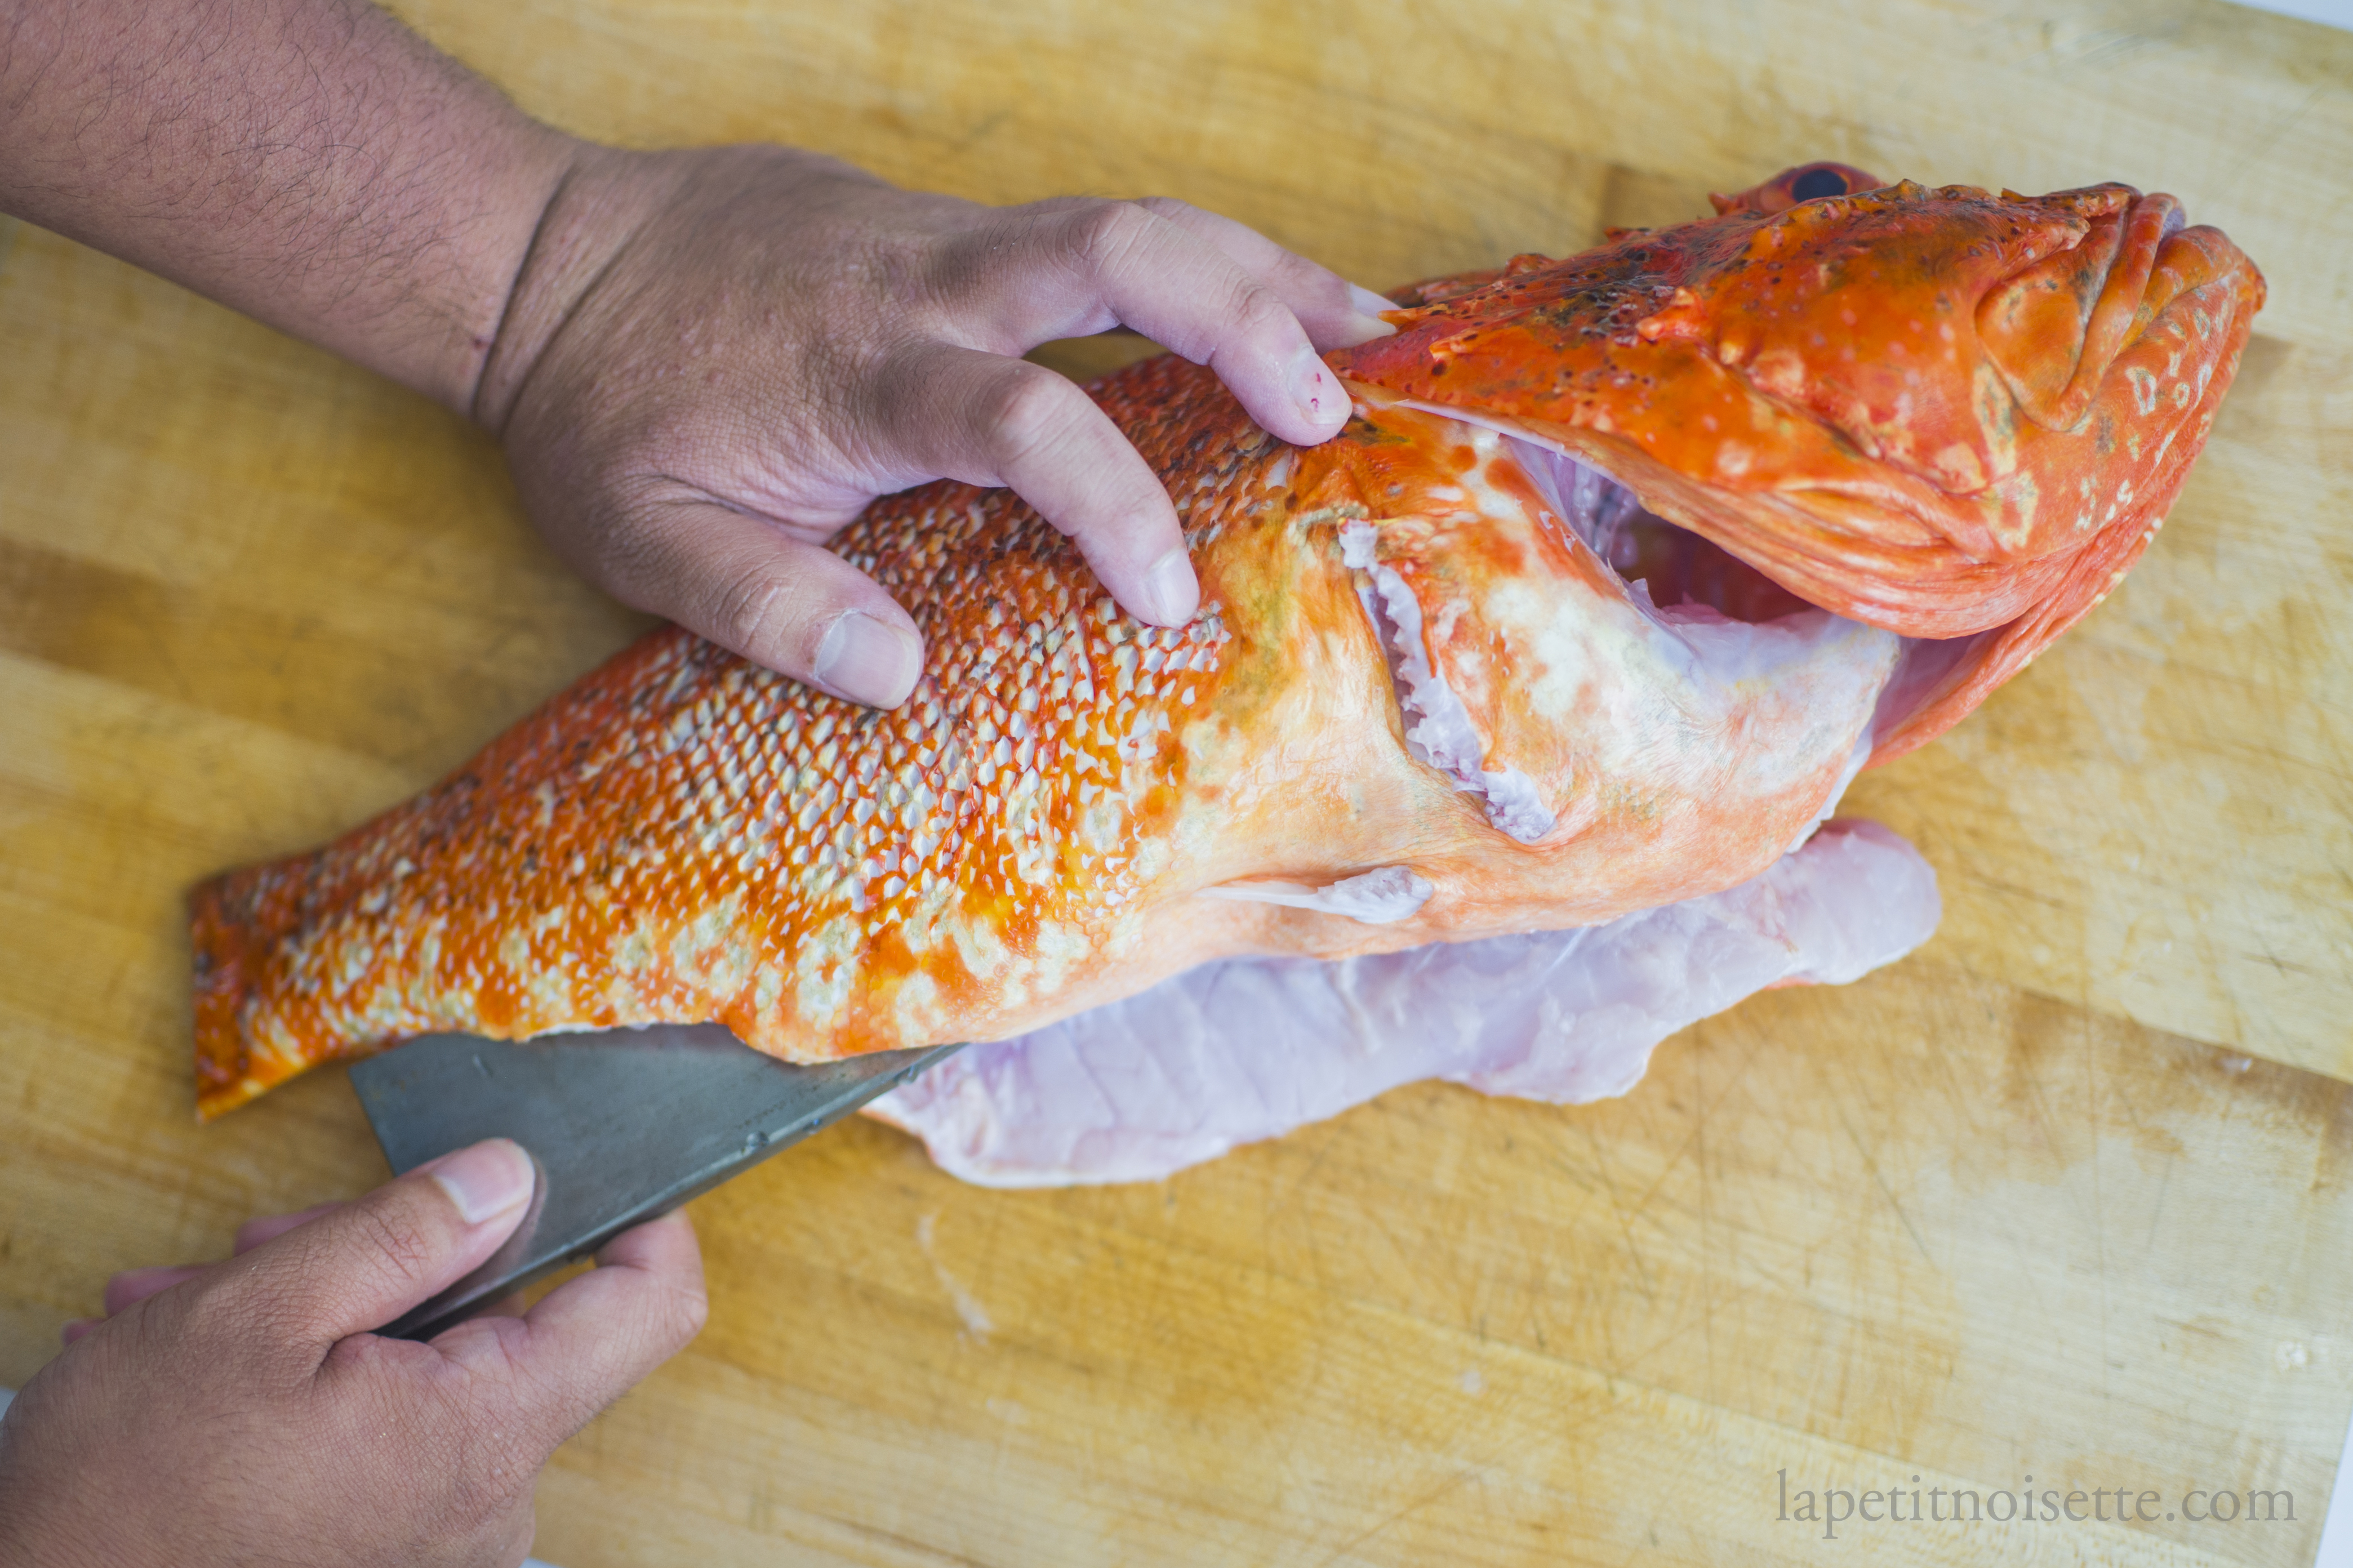 Steps in filleting a Japanese scorpionfish.